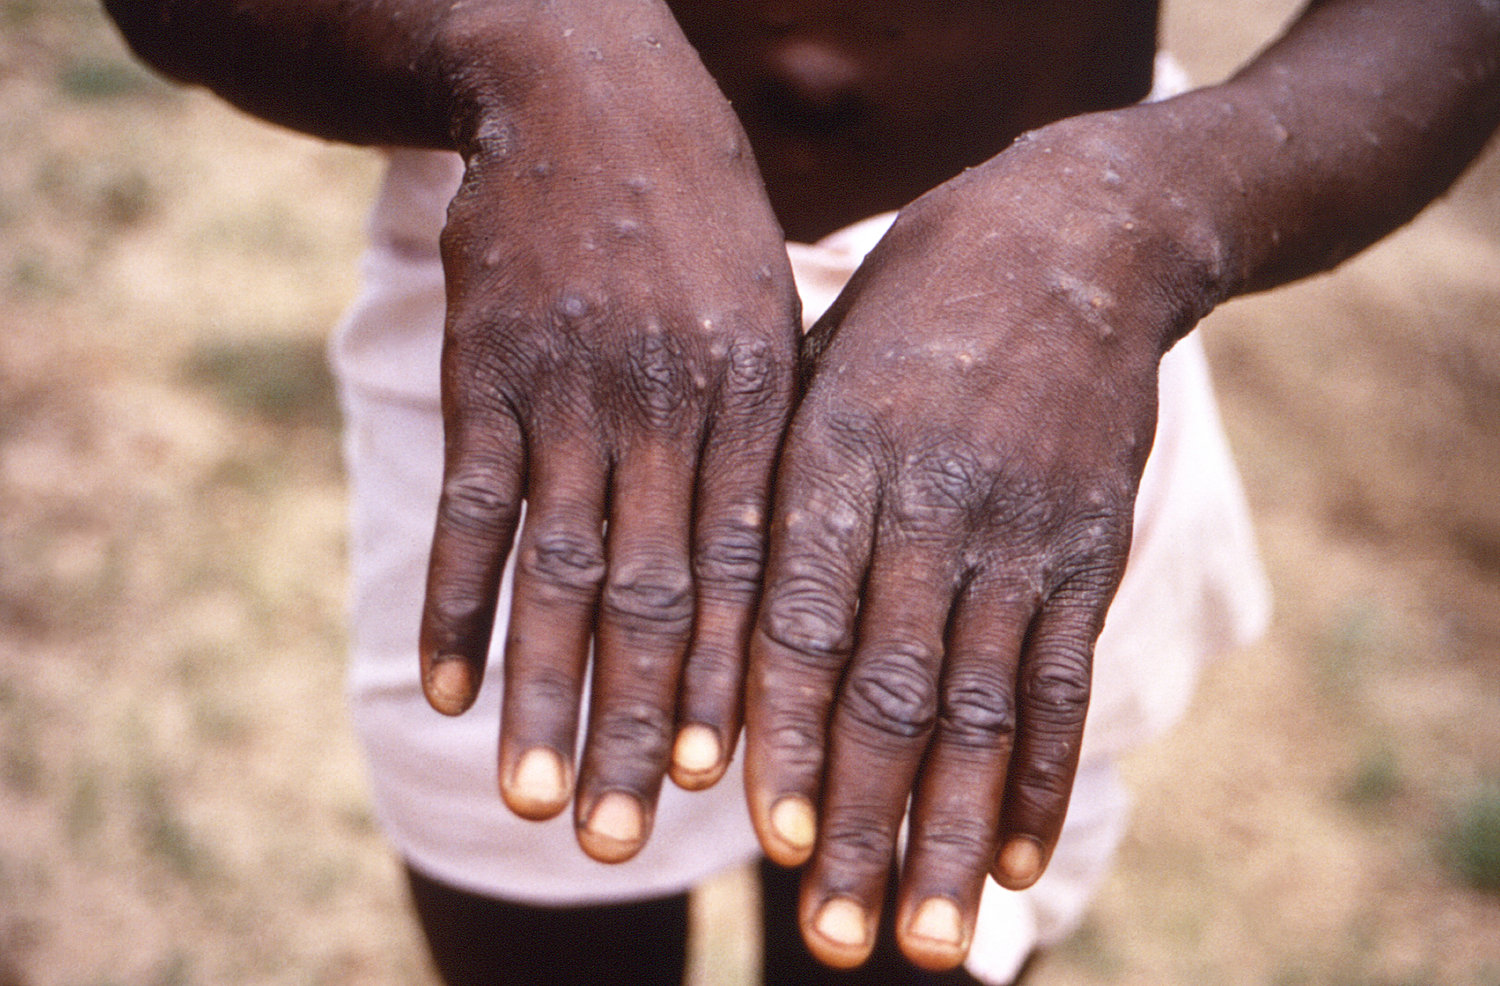 The dorsal surfaces of the hands of a monkeypox case patient, who was displaying the appearance of the characteristic rash during its recuperative stage. The expanding monkeypox outbreak in more than 70 countries is an “extraordinary” situation that qualifies as a global emergency, the World Health Organization chief said July 23.